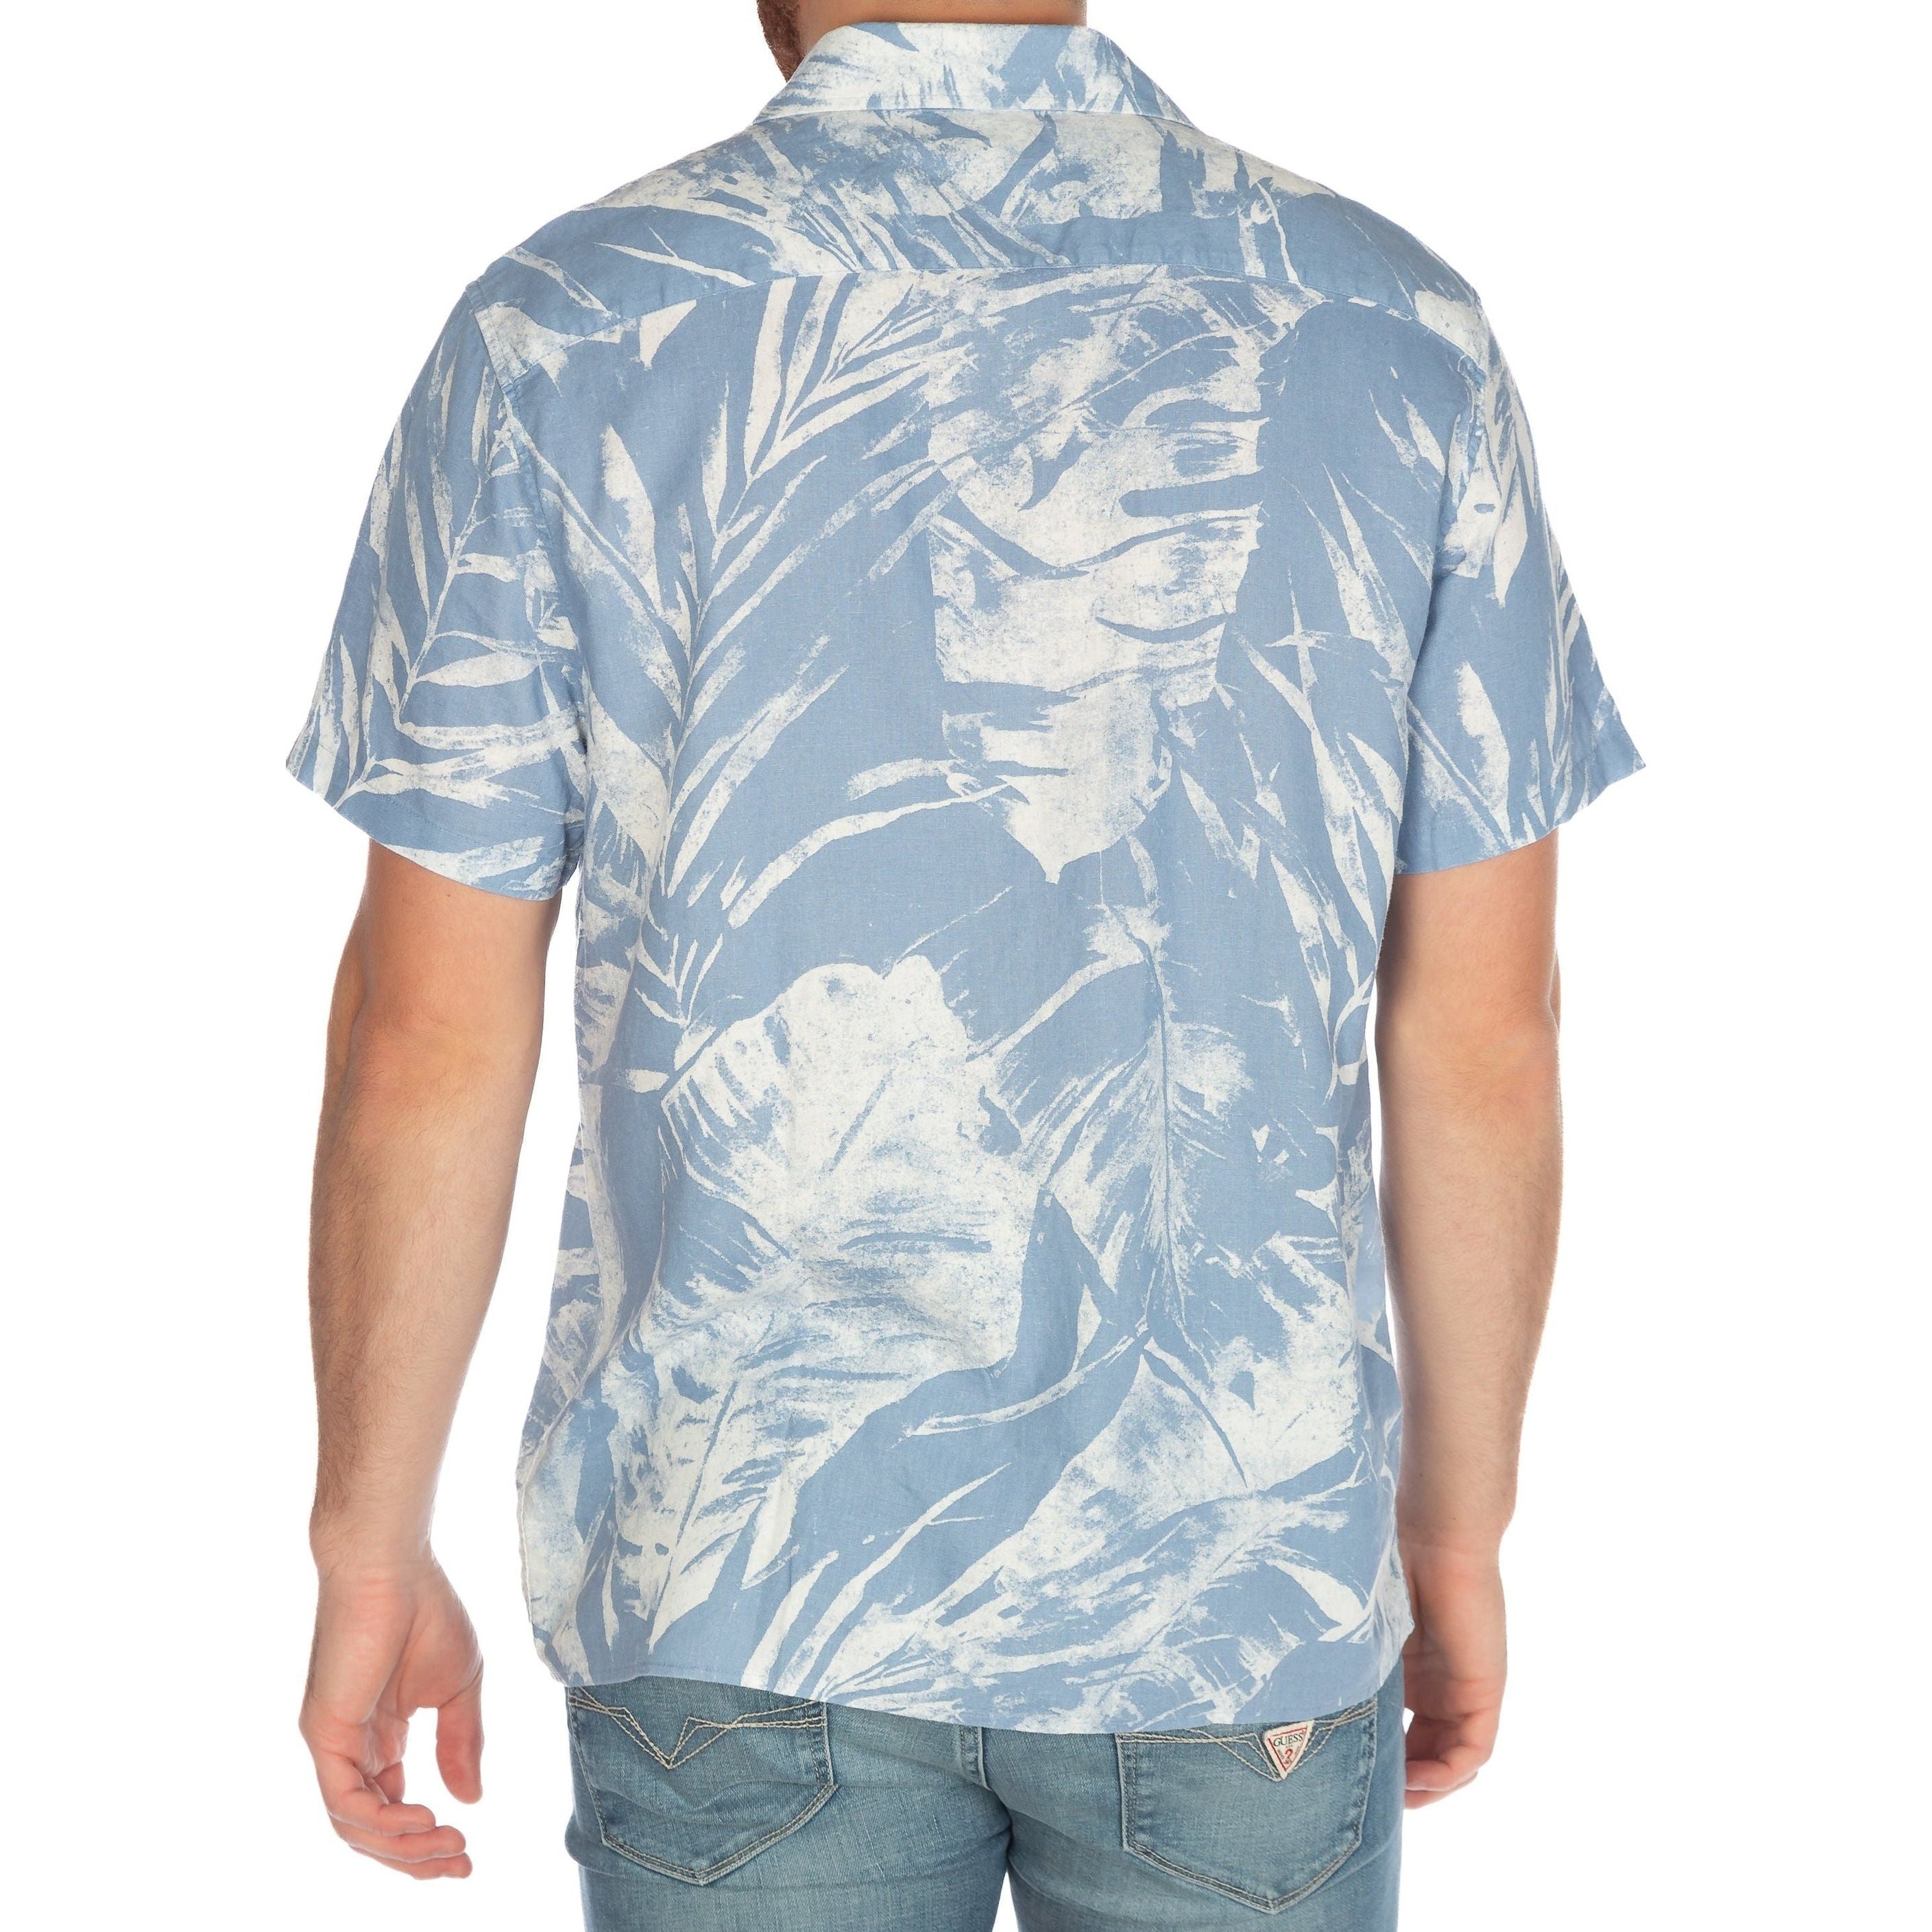 Guess - Collin Inside Printed Shirt in Cloudy White Leaf Print